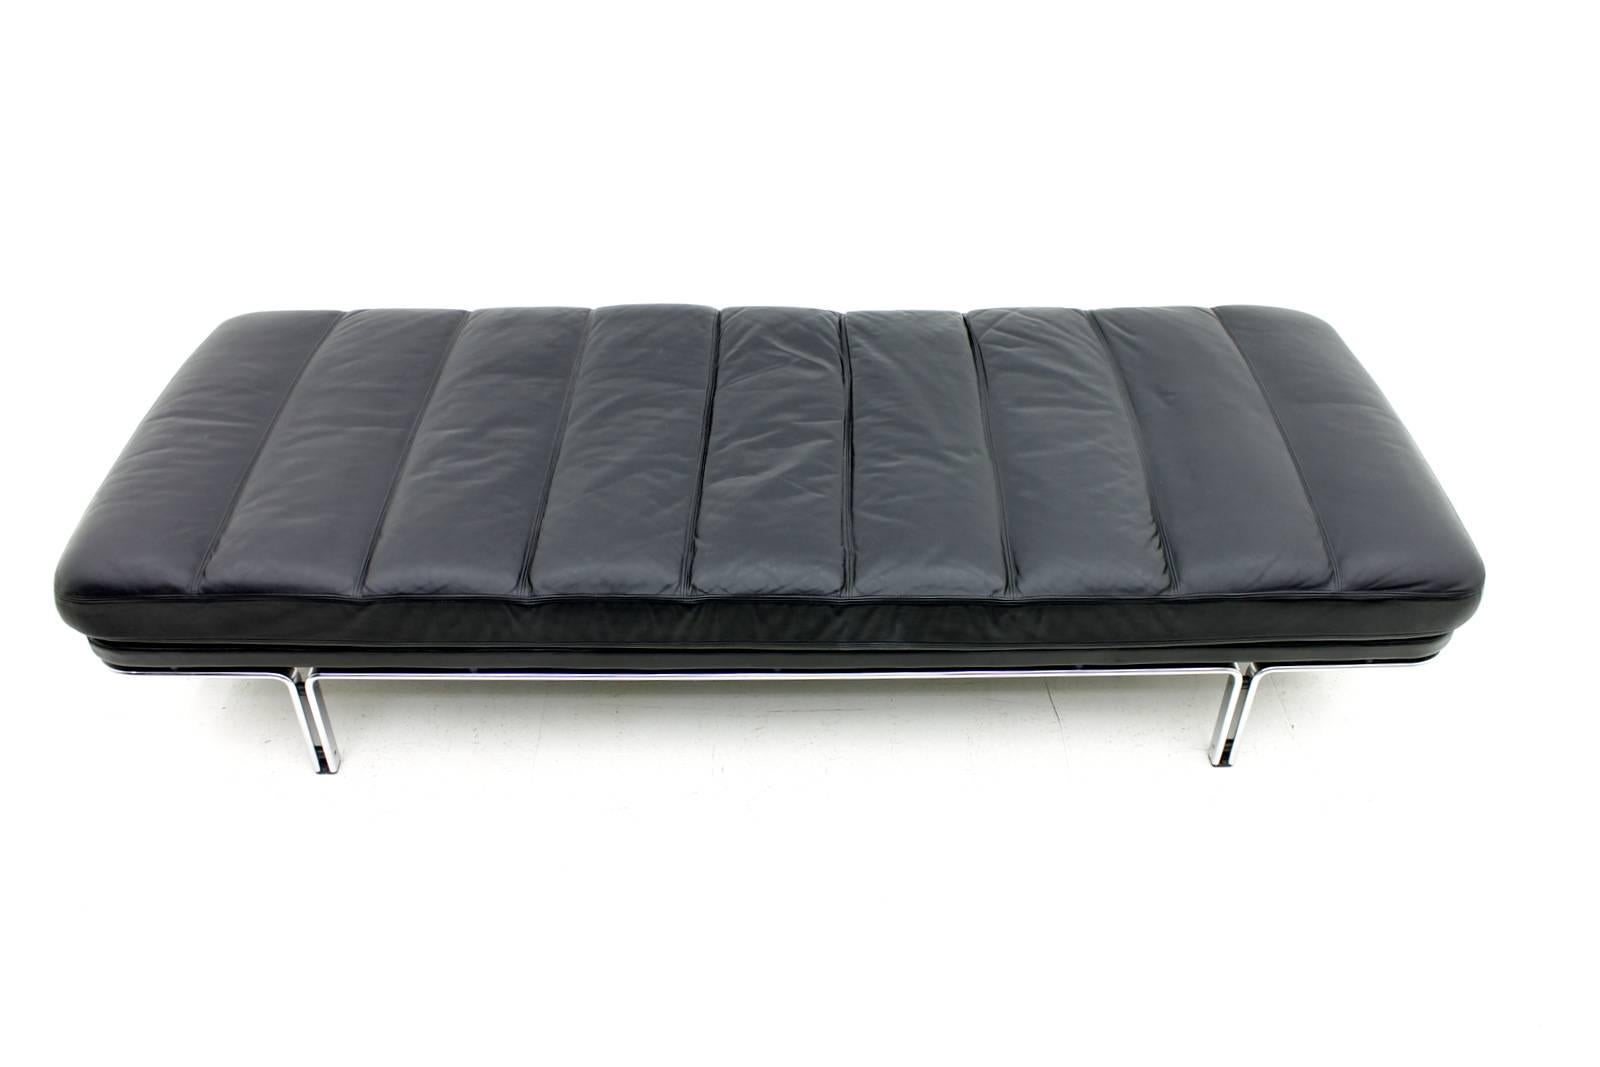 German Leather and Steel Daybed by Horst Bruning, Kill International, 1968